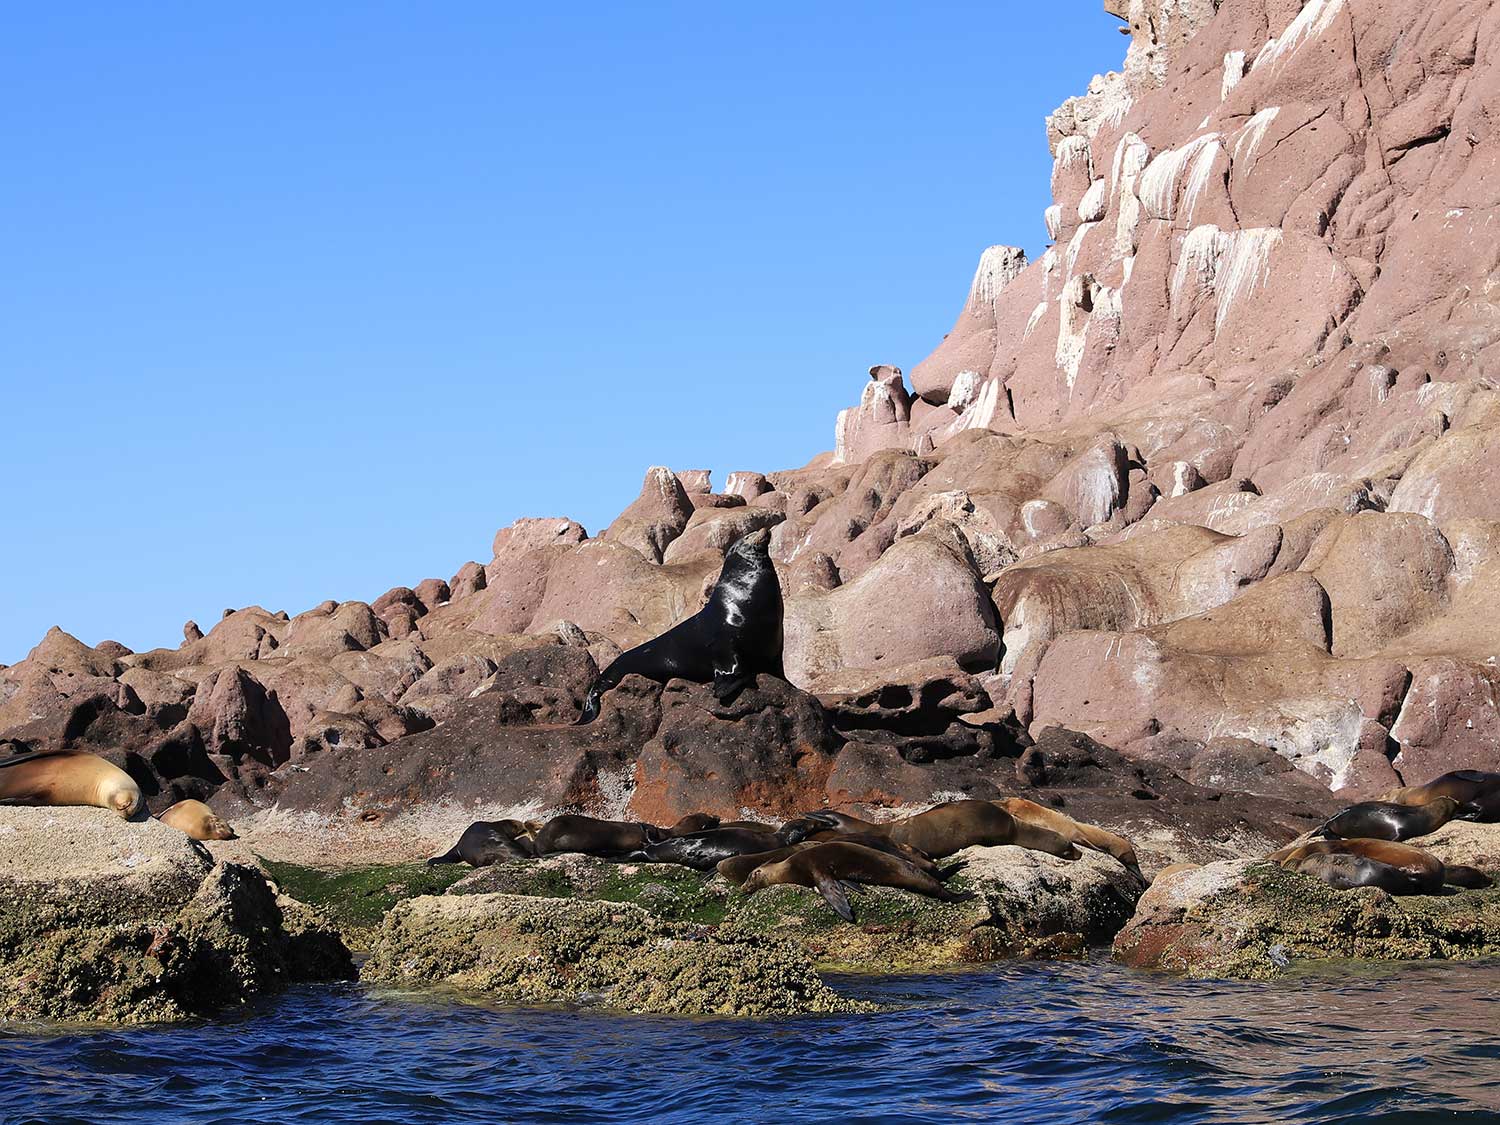 A herd of sea lions on a rocky outcrop by the ocean.